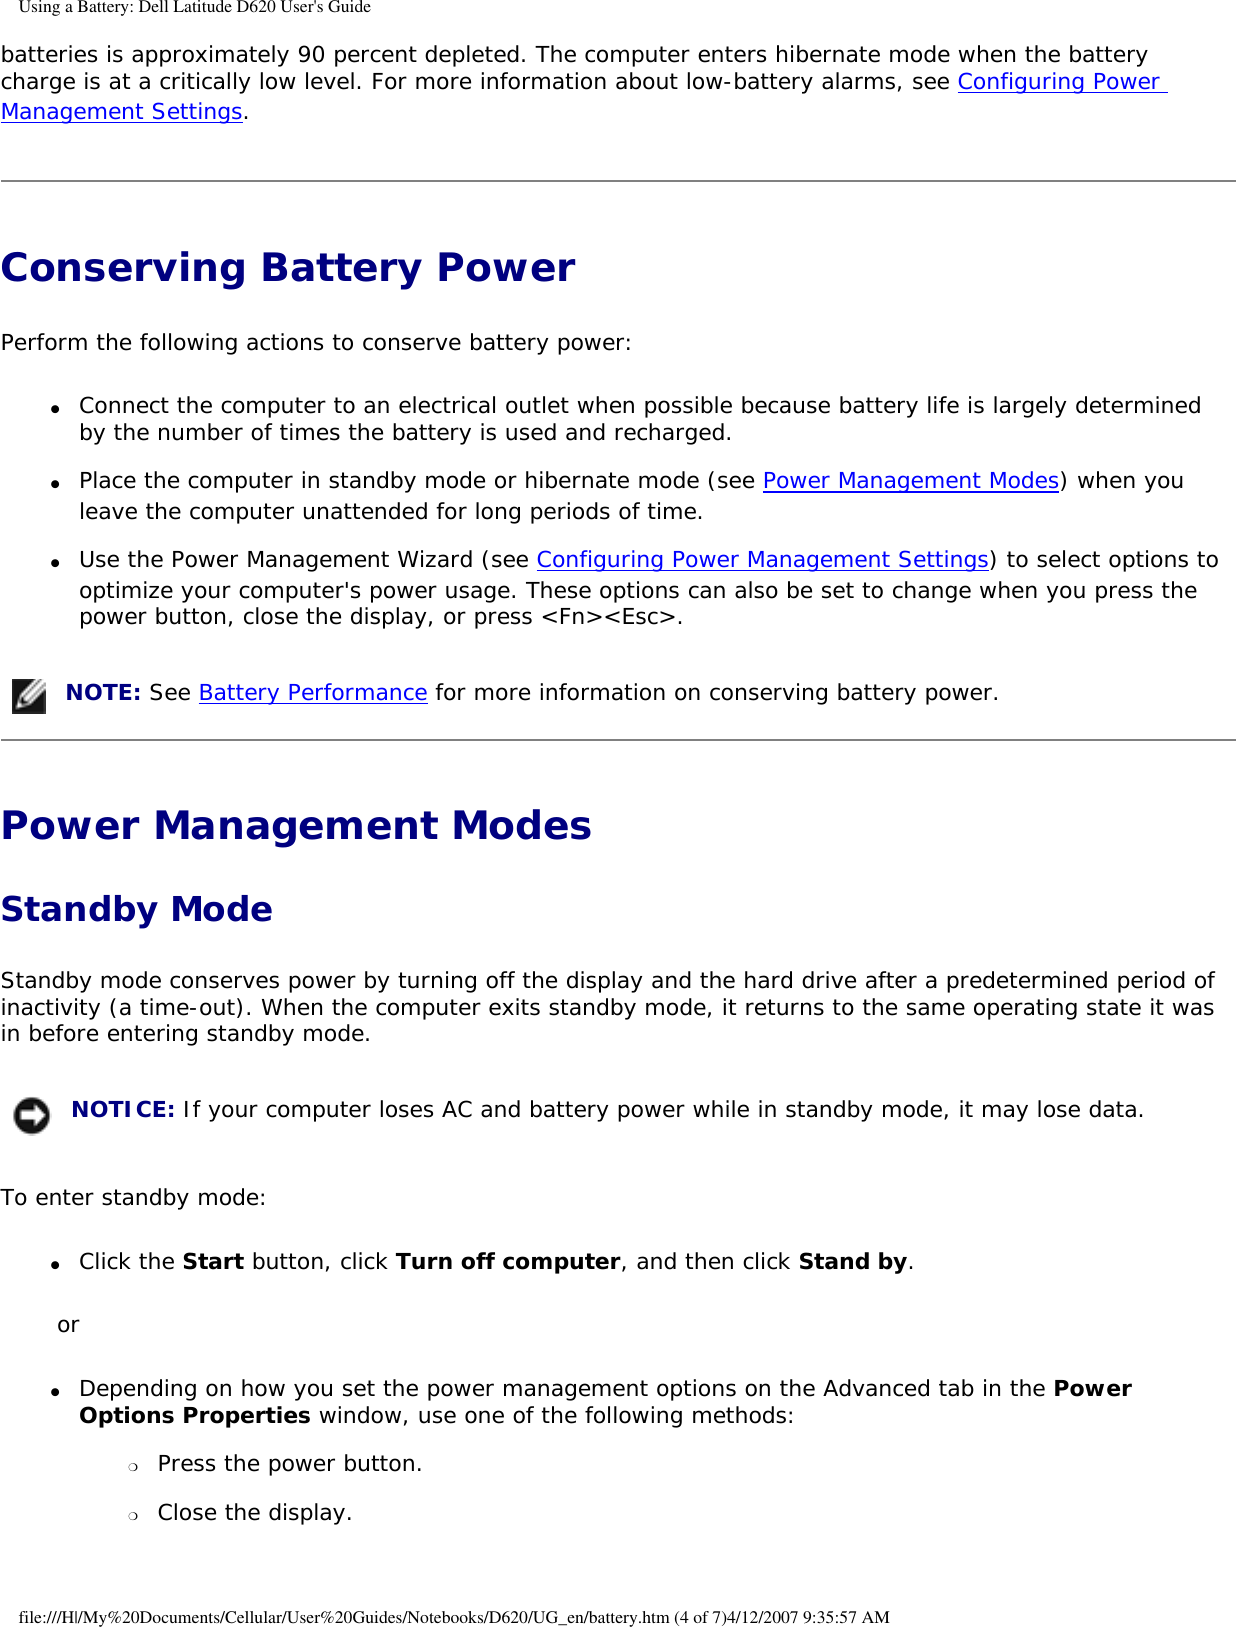 Using a Battery: Dell Latitude D620 User&apos;s Guidebatteries is approximately 90 percent depleted. The computer enters hibernate mode when the battery charge is at a critically low level. For more information about low-battery alarms, see Configuring Power Management Settings.Conserving Battery Power Perform the following actions to conserve battery power:●     Connect the computer to an electrical outlet when possible because battery life is largely determined by the number of times the battery is used and recharged.  ●     Place the computer in standby mode or hibernate mode (see Power Management Modes) when you leave the computer unattended for long periods of time.  ●     Use the Power Management Wizard (see Configuring Power Management Settings) to select options to optimize your computer&apos;s power usage. These options can also be set to change when you press the power button, close the display, or press &lt;Fn&gt;&lt;Esc&gt;.   NOTE: See Battery Performance for more information on conserving battery power.Power Management Modes Standby ModeStandby mode conserves power by turning off the display and the hard drive after a predetermined period of inactivity (a time-out). When the computer exits standby mode, it returns to the same operating state it was in before entering standby mode. NOTICE: If your computer loses AC and battery power while in standby mode, it may lose data.To enter standby mode:●     Click the Start button, click Turn off computer, and then click Stand by.  or●     Depending on how you set the power management options on the Advanced tab in the Power Options Properties window, use one of the following methods:  ❍     Press the power button.  ❍     Close the display.  file:///H|/My%20Documents/Cellular/User%20Guides/Notebooks/D620/UG_en/battery.htm (4 of 7)4/12/2007 9:35:57 AM